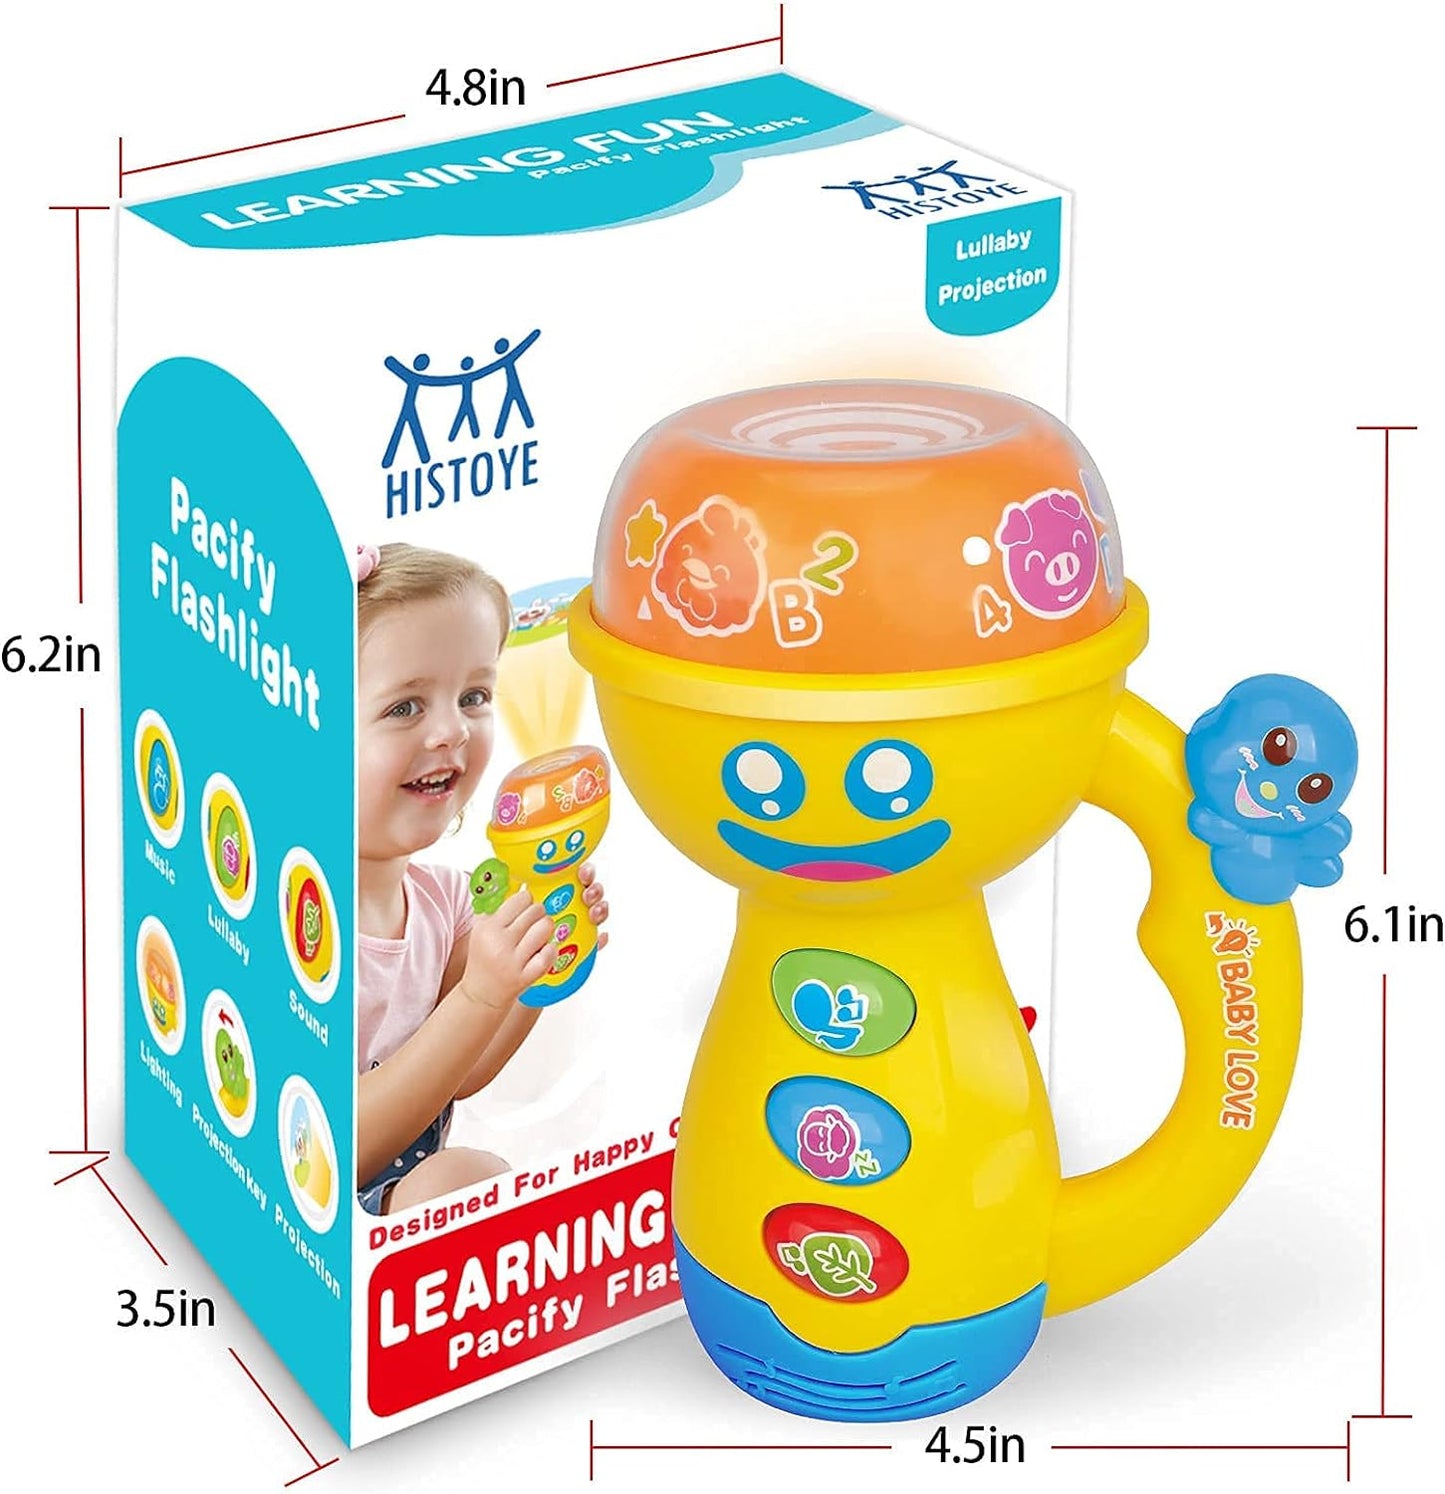 Musical lantern for baby, night light projector